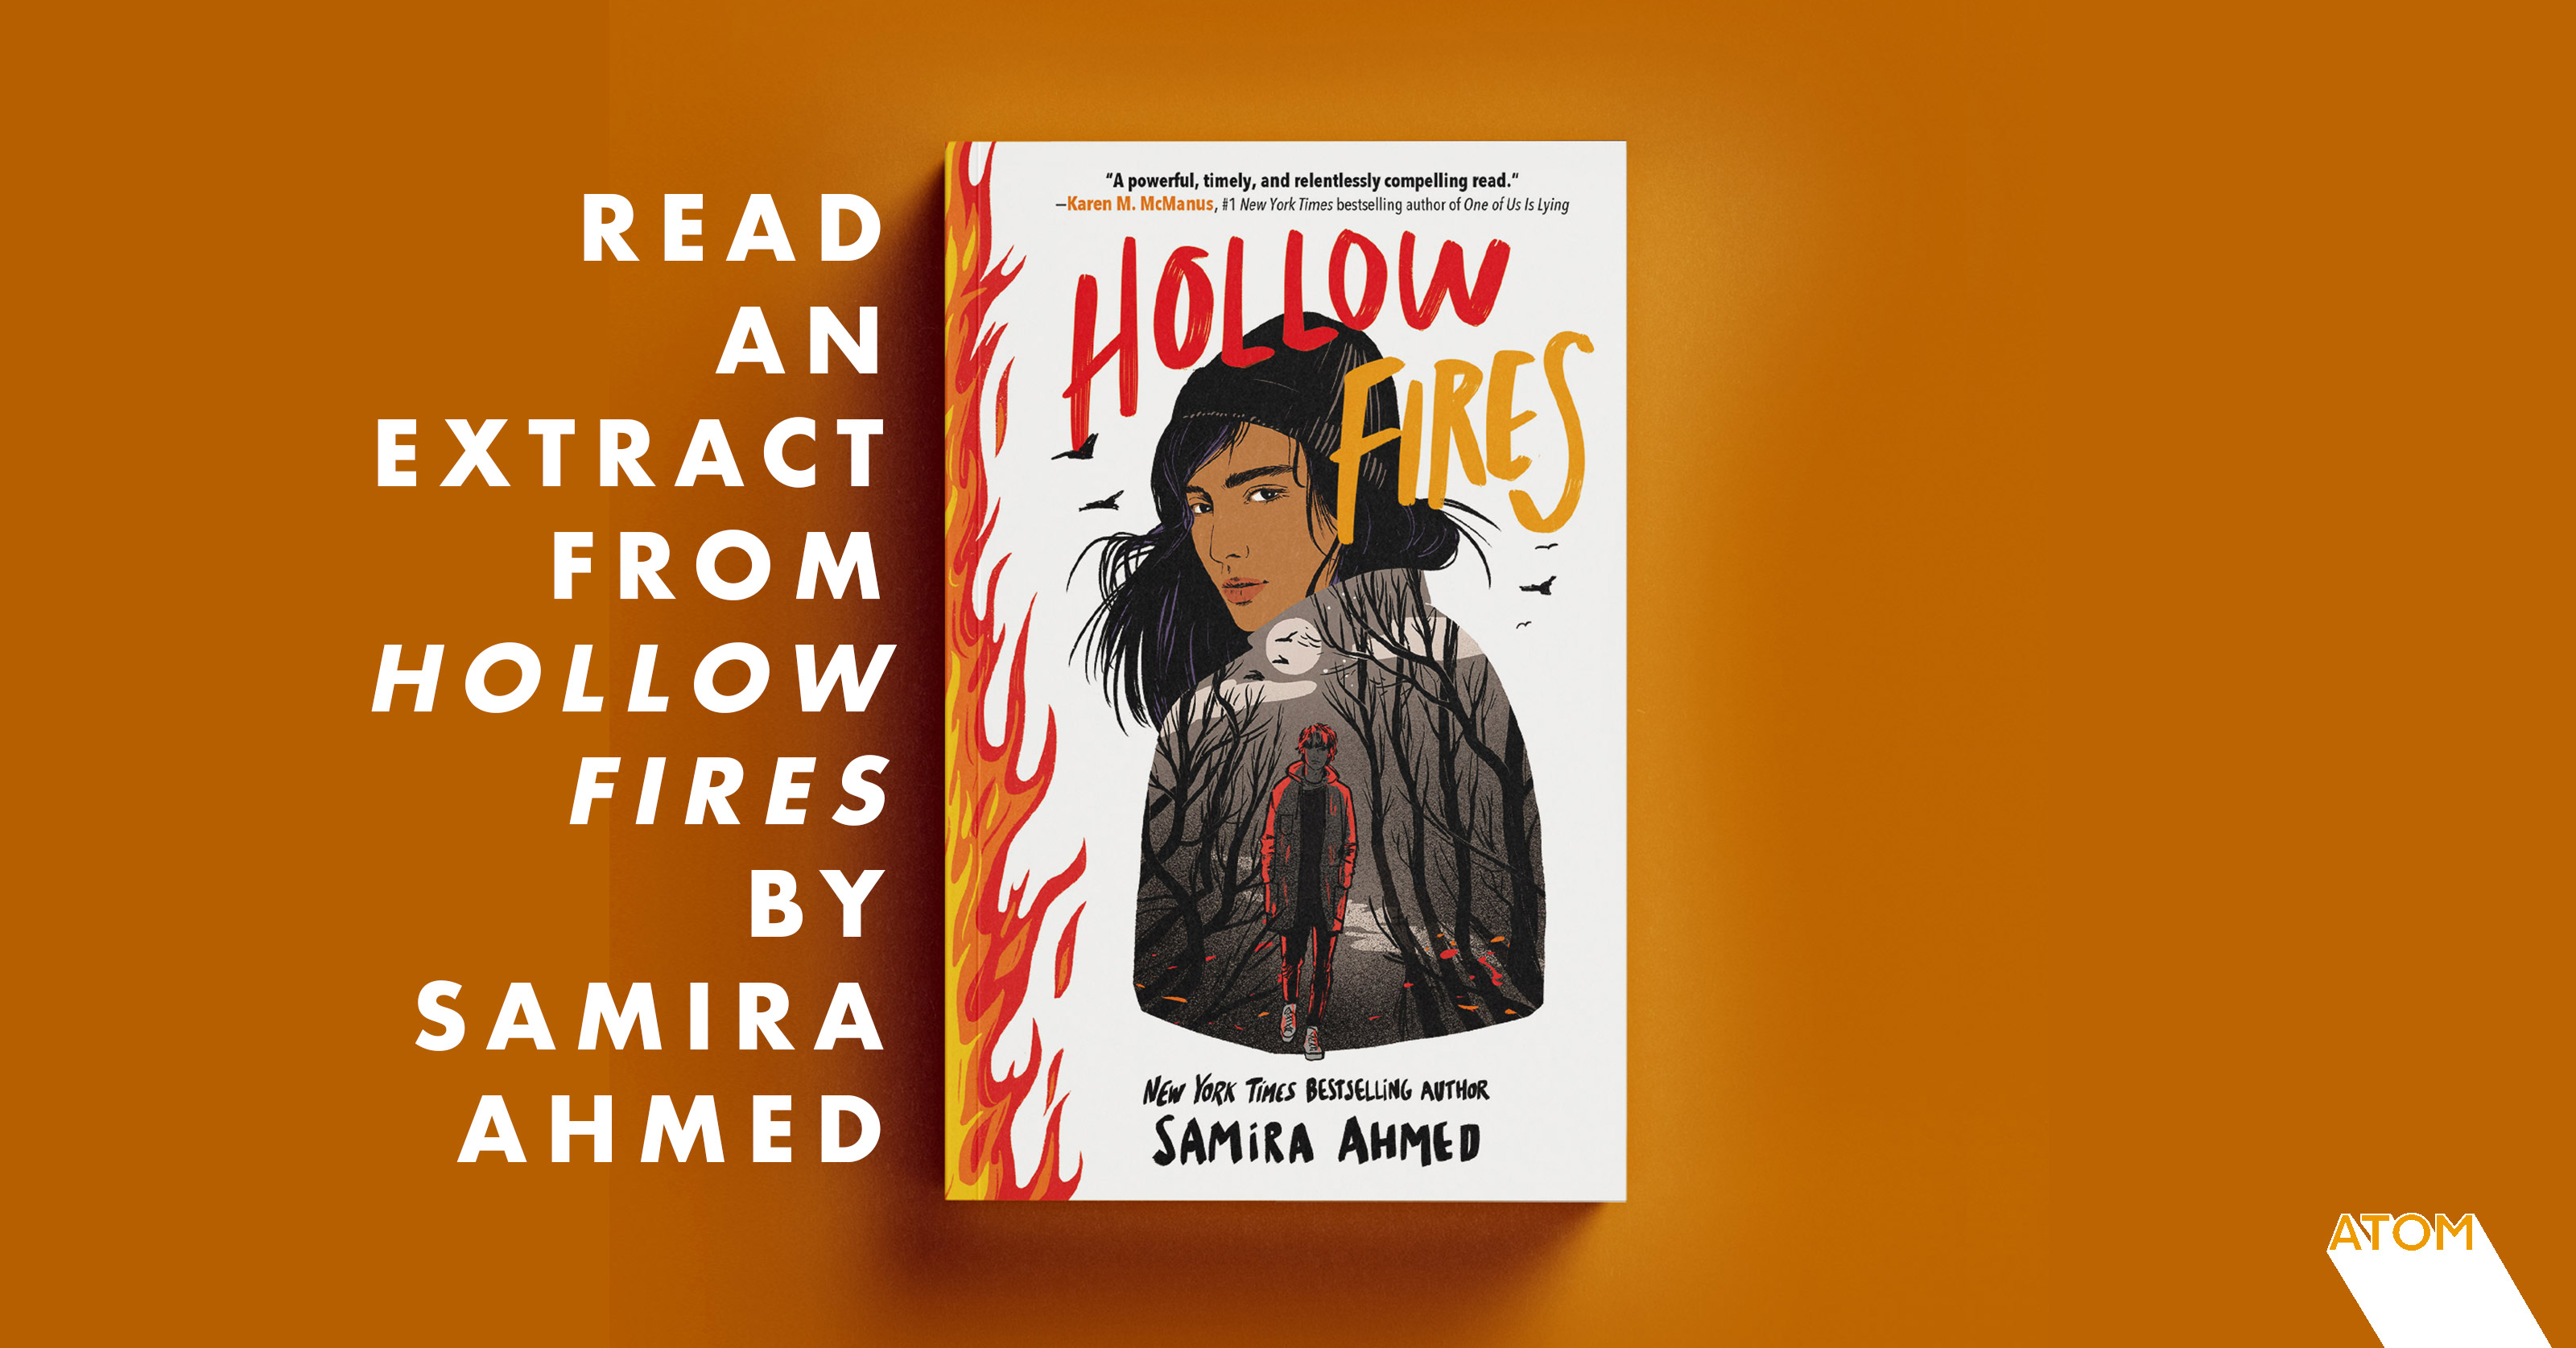 Hollow Fires by Samira Ahmed